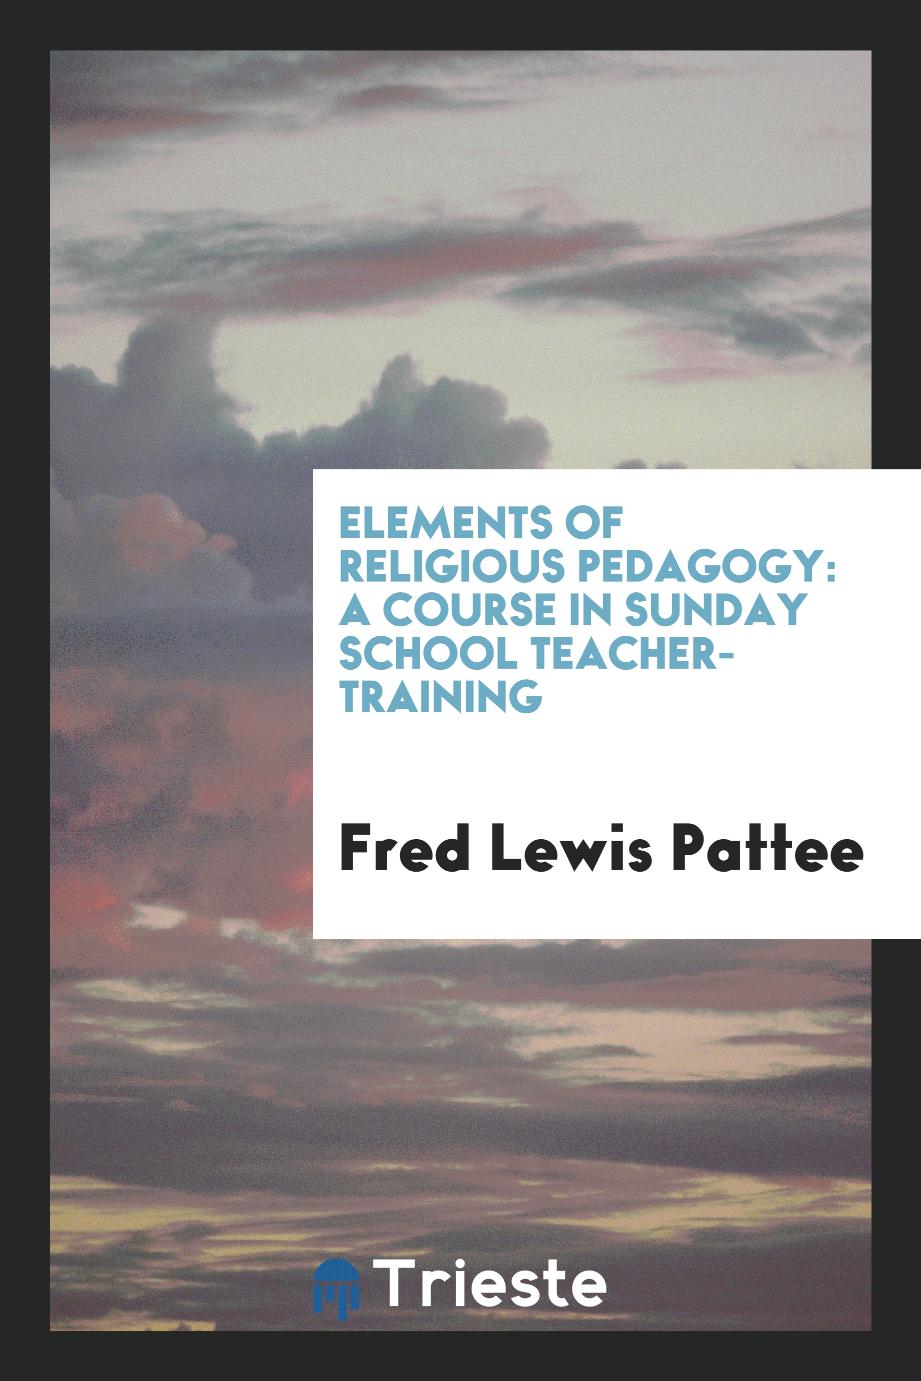 Elements of Religious Pedagogy: A Course in Sunday School Teacher-Training